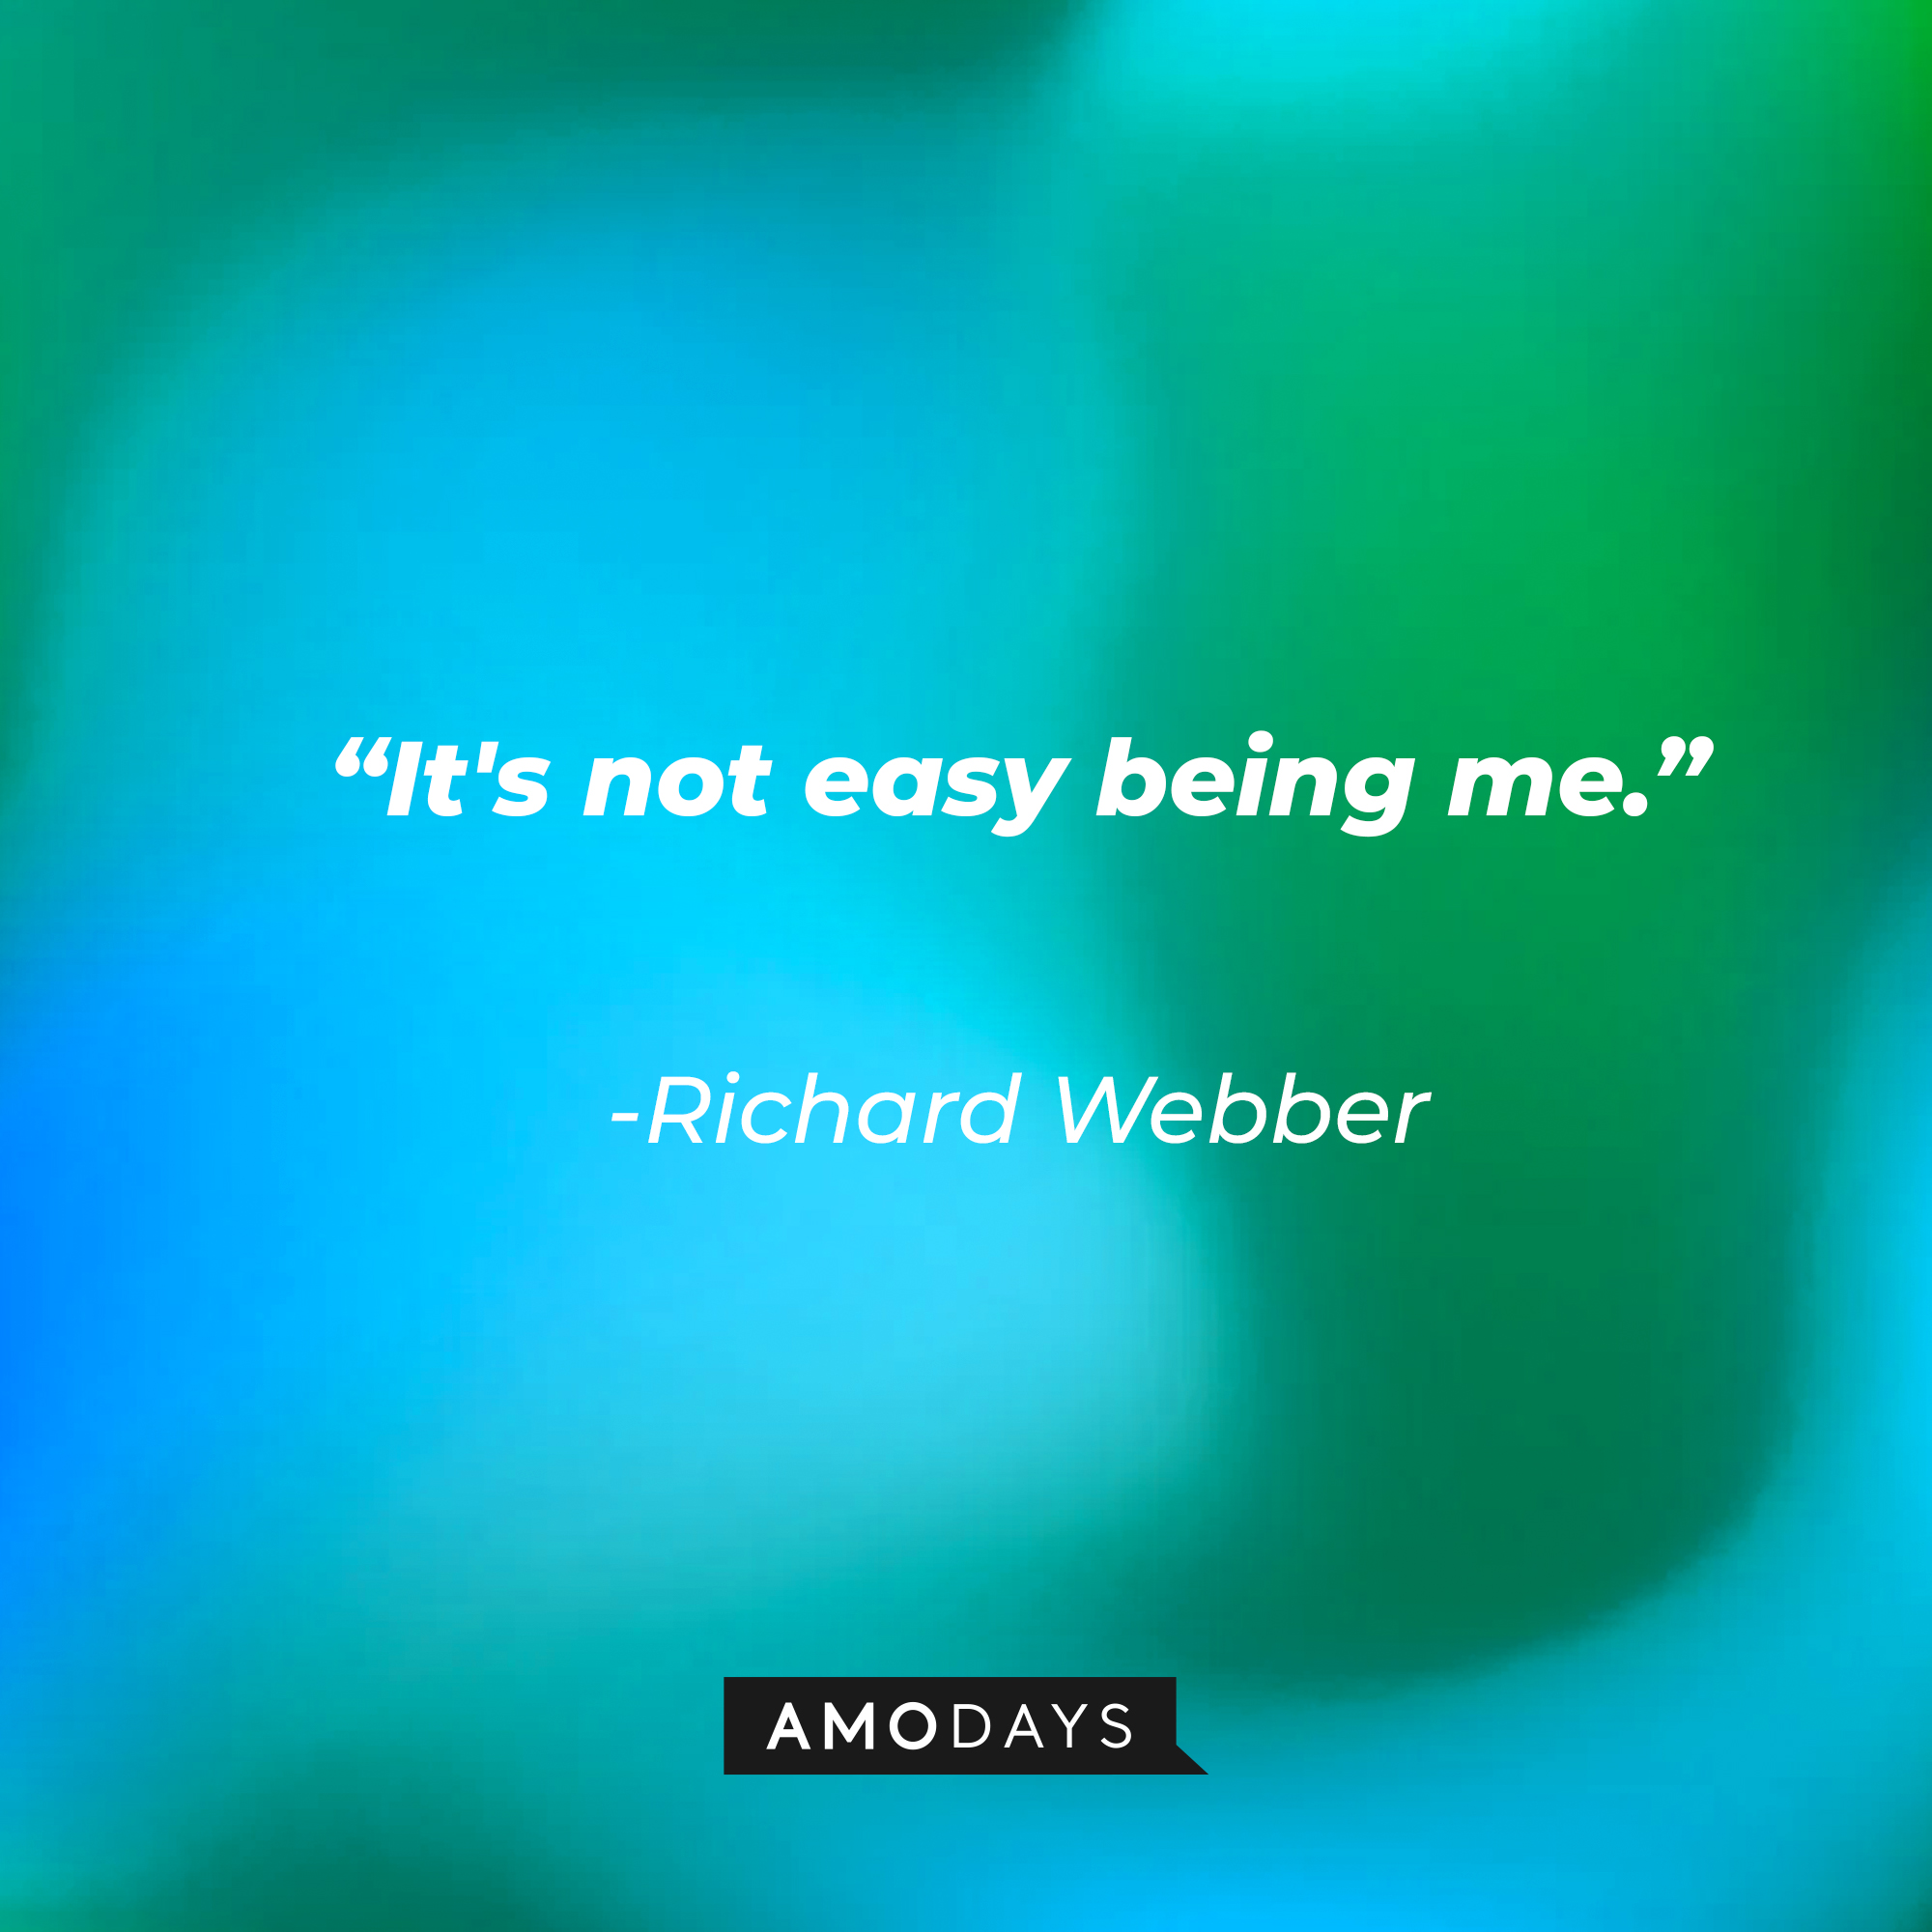 Richard Webber with his quote: "It's not easy being me." | Source: Amodays